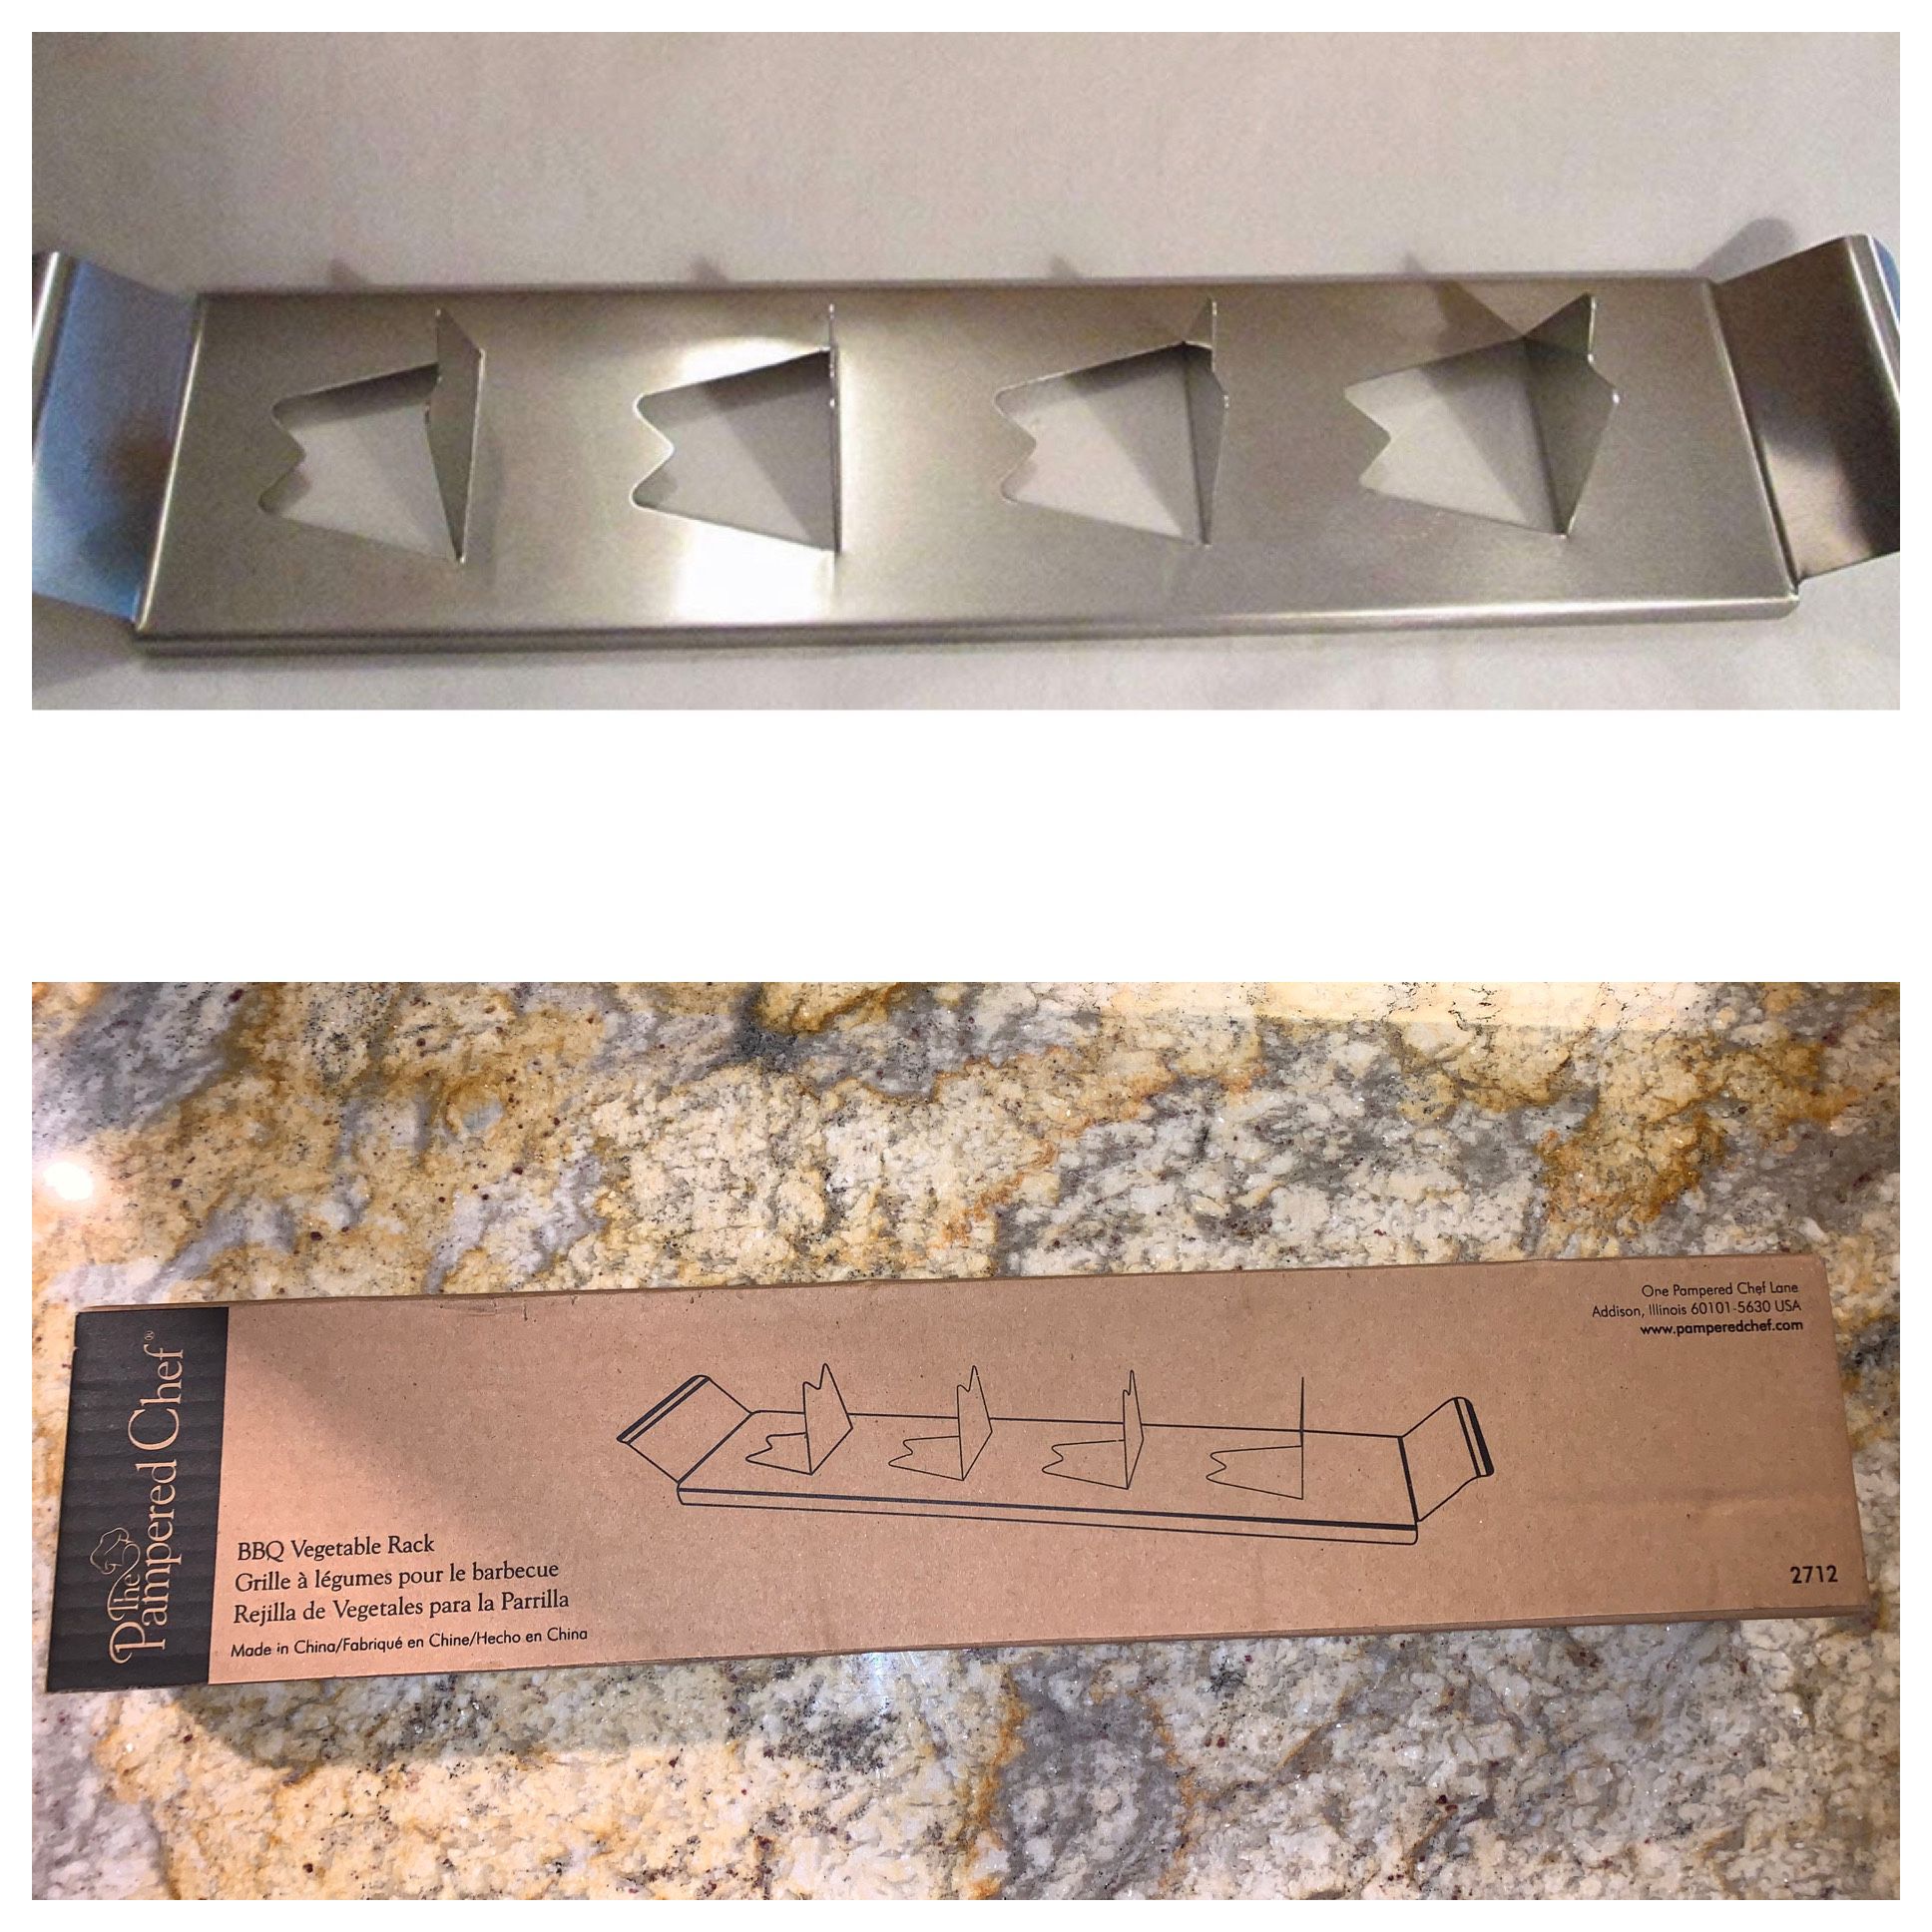 BRAND NEW Pampered Chef Barbeque Vegetable Rack